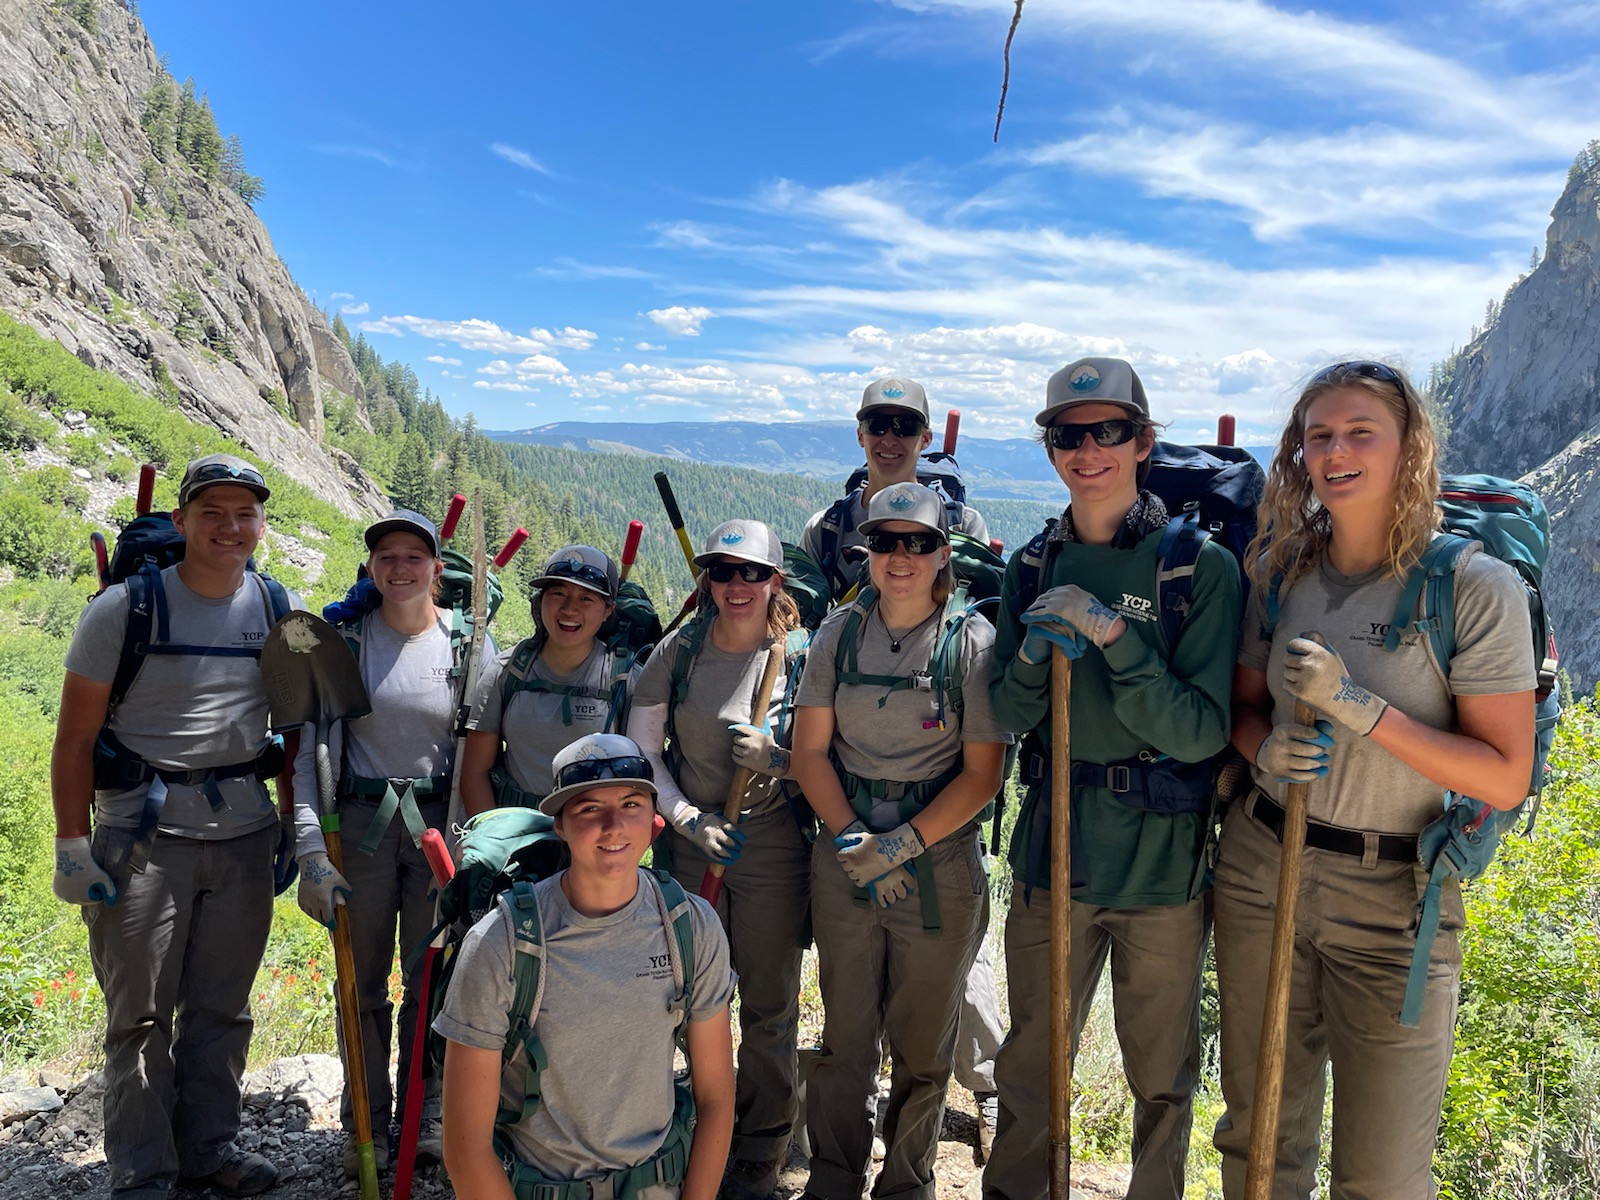 The crew in Death Canyon after a long day of hard work in the sun!